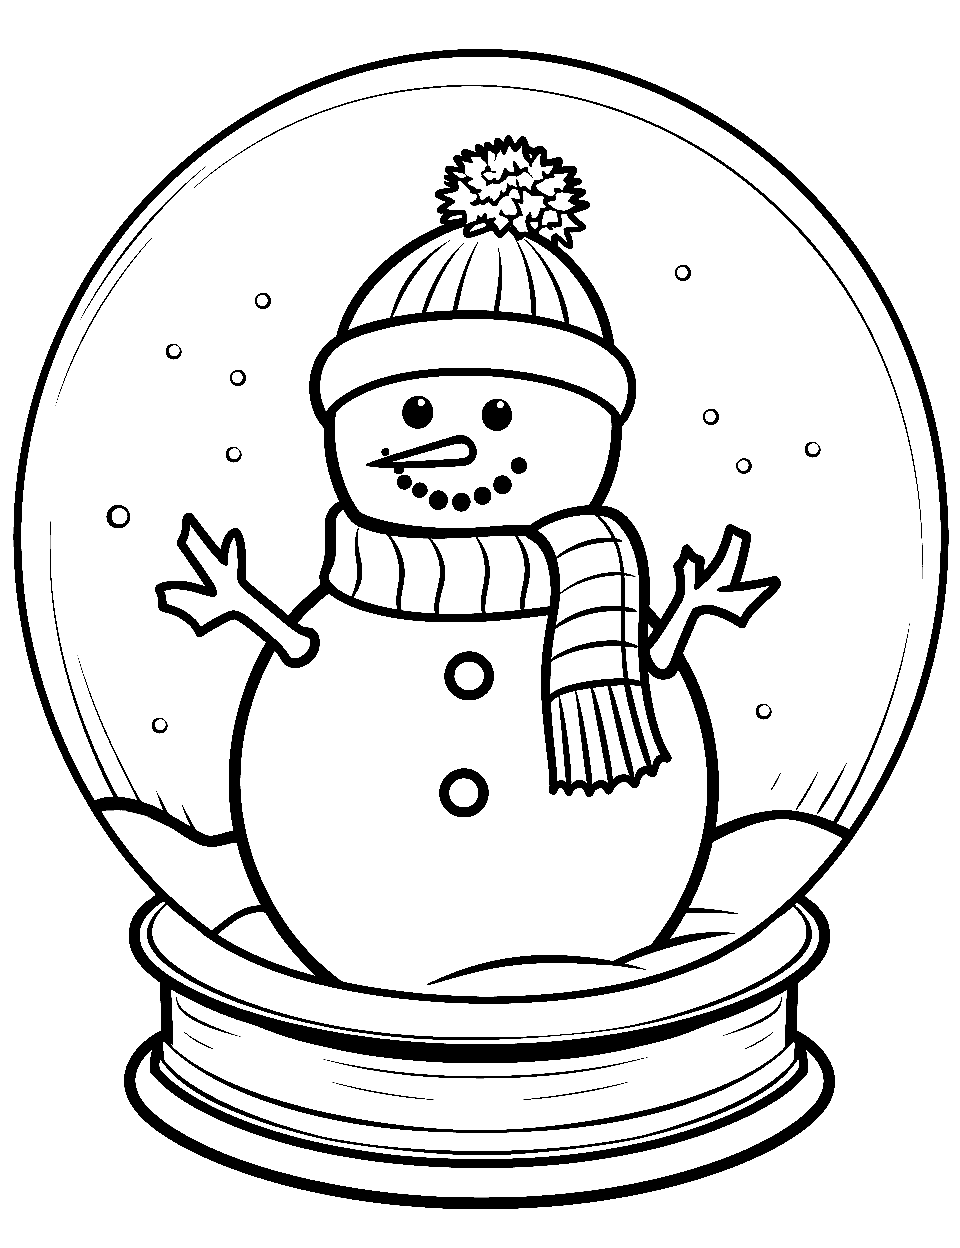 Snowman coloring pages free printable sheets